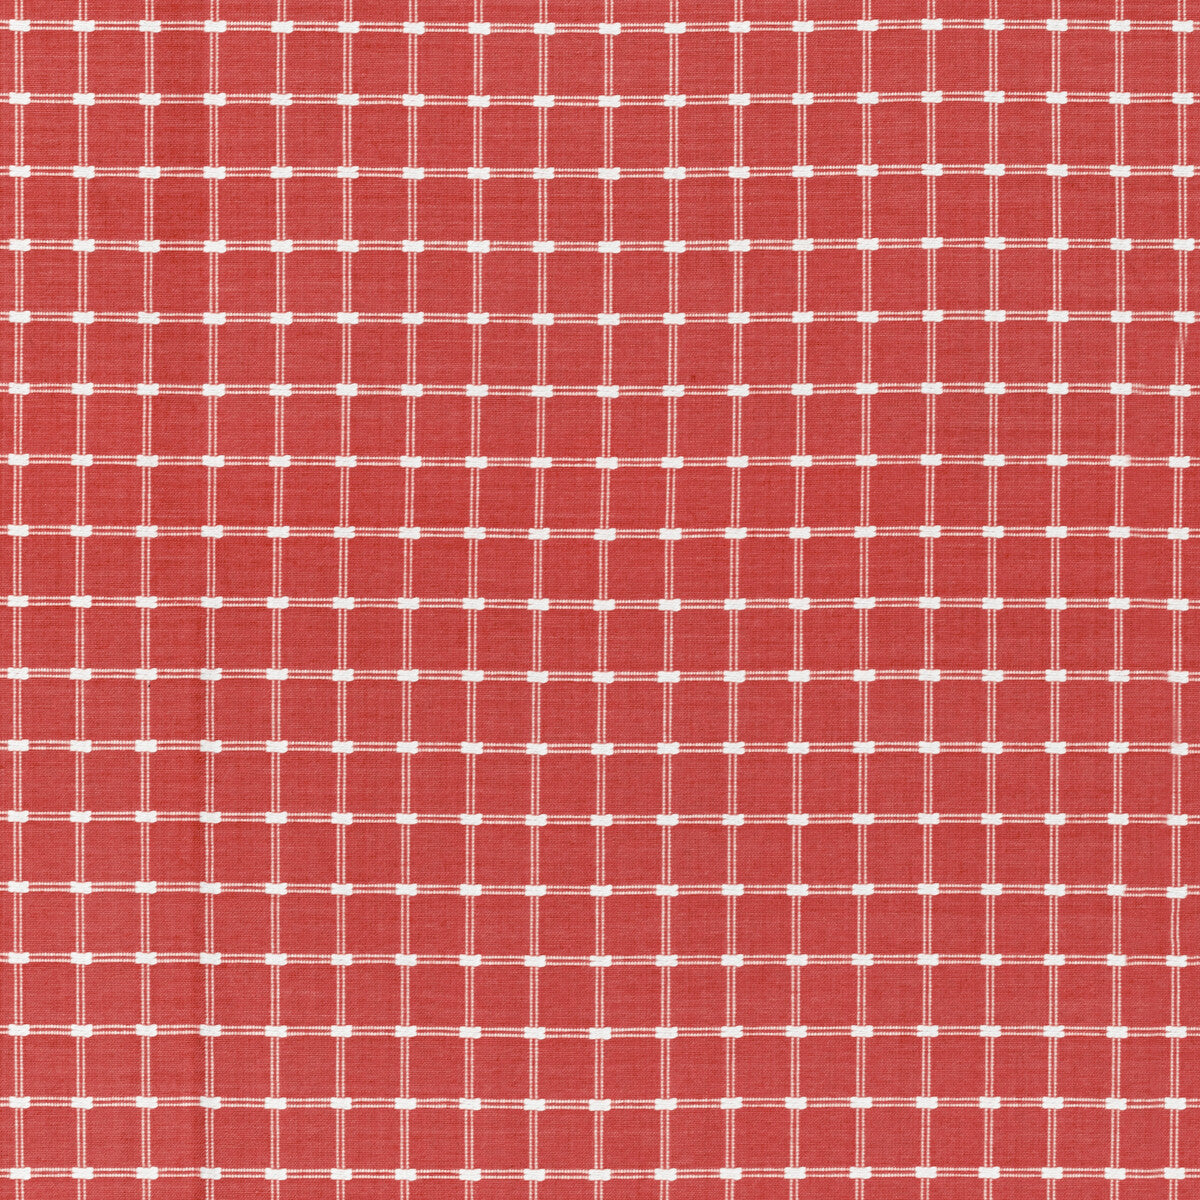 Lison Check fabric in red color - pattern 8022116.19.0 - by Brunschwig &amp; Fils in the Normant Checks And Stripes II collection